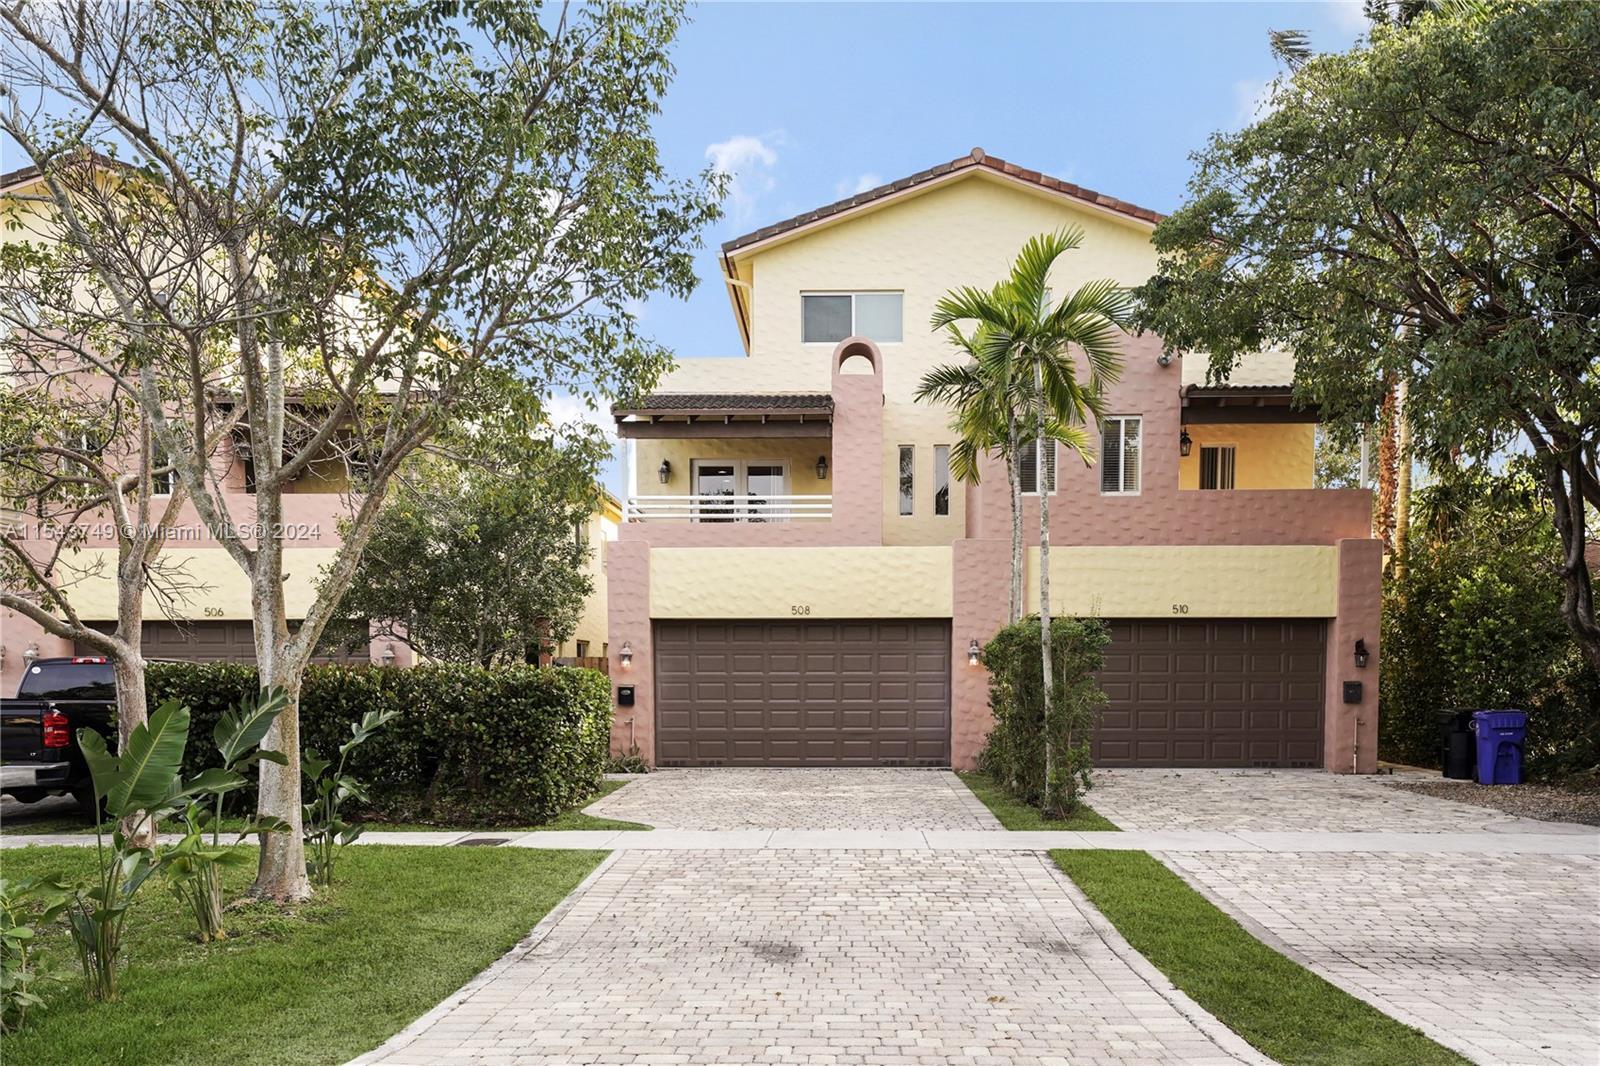 3-story townhome nestled in the heart of Fort Lauderdale with 4 bedrooms, 4 bathrooms, and a 2-car g